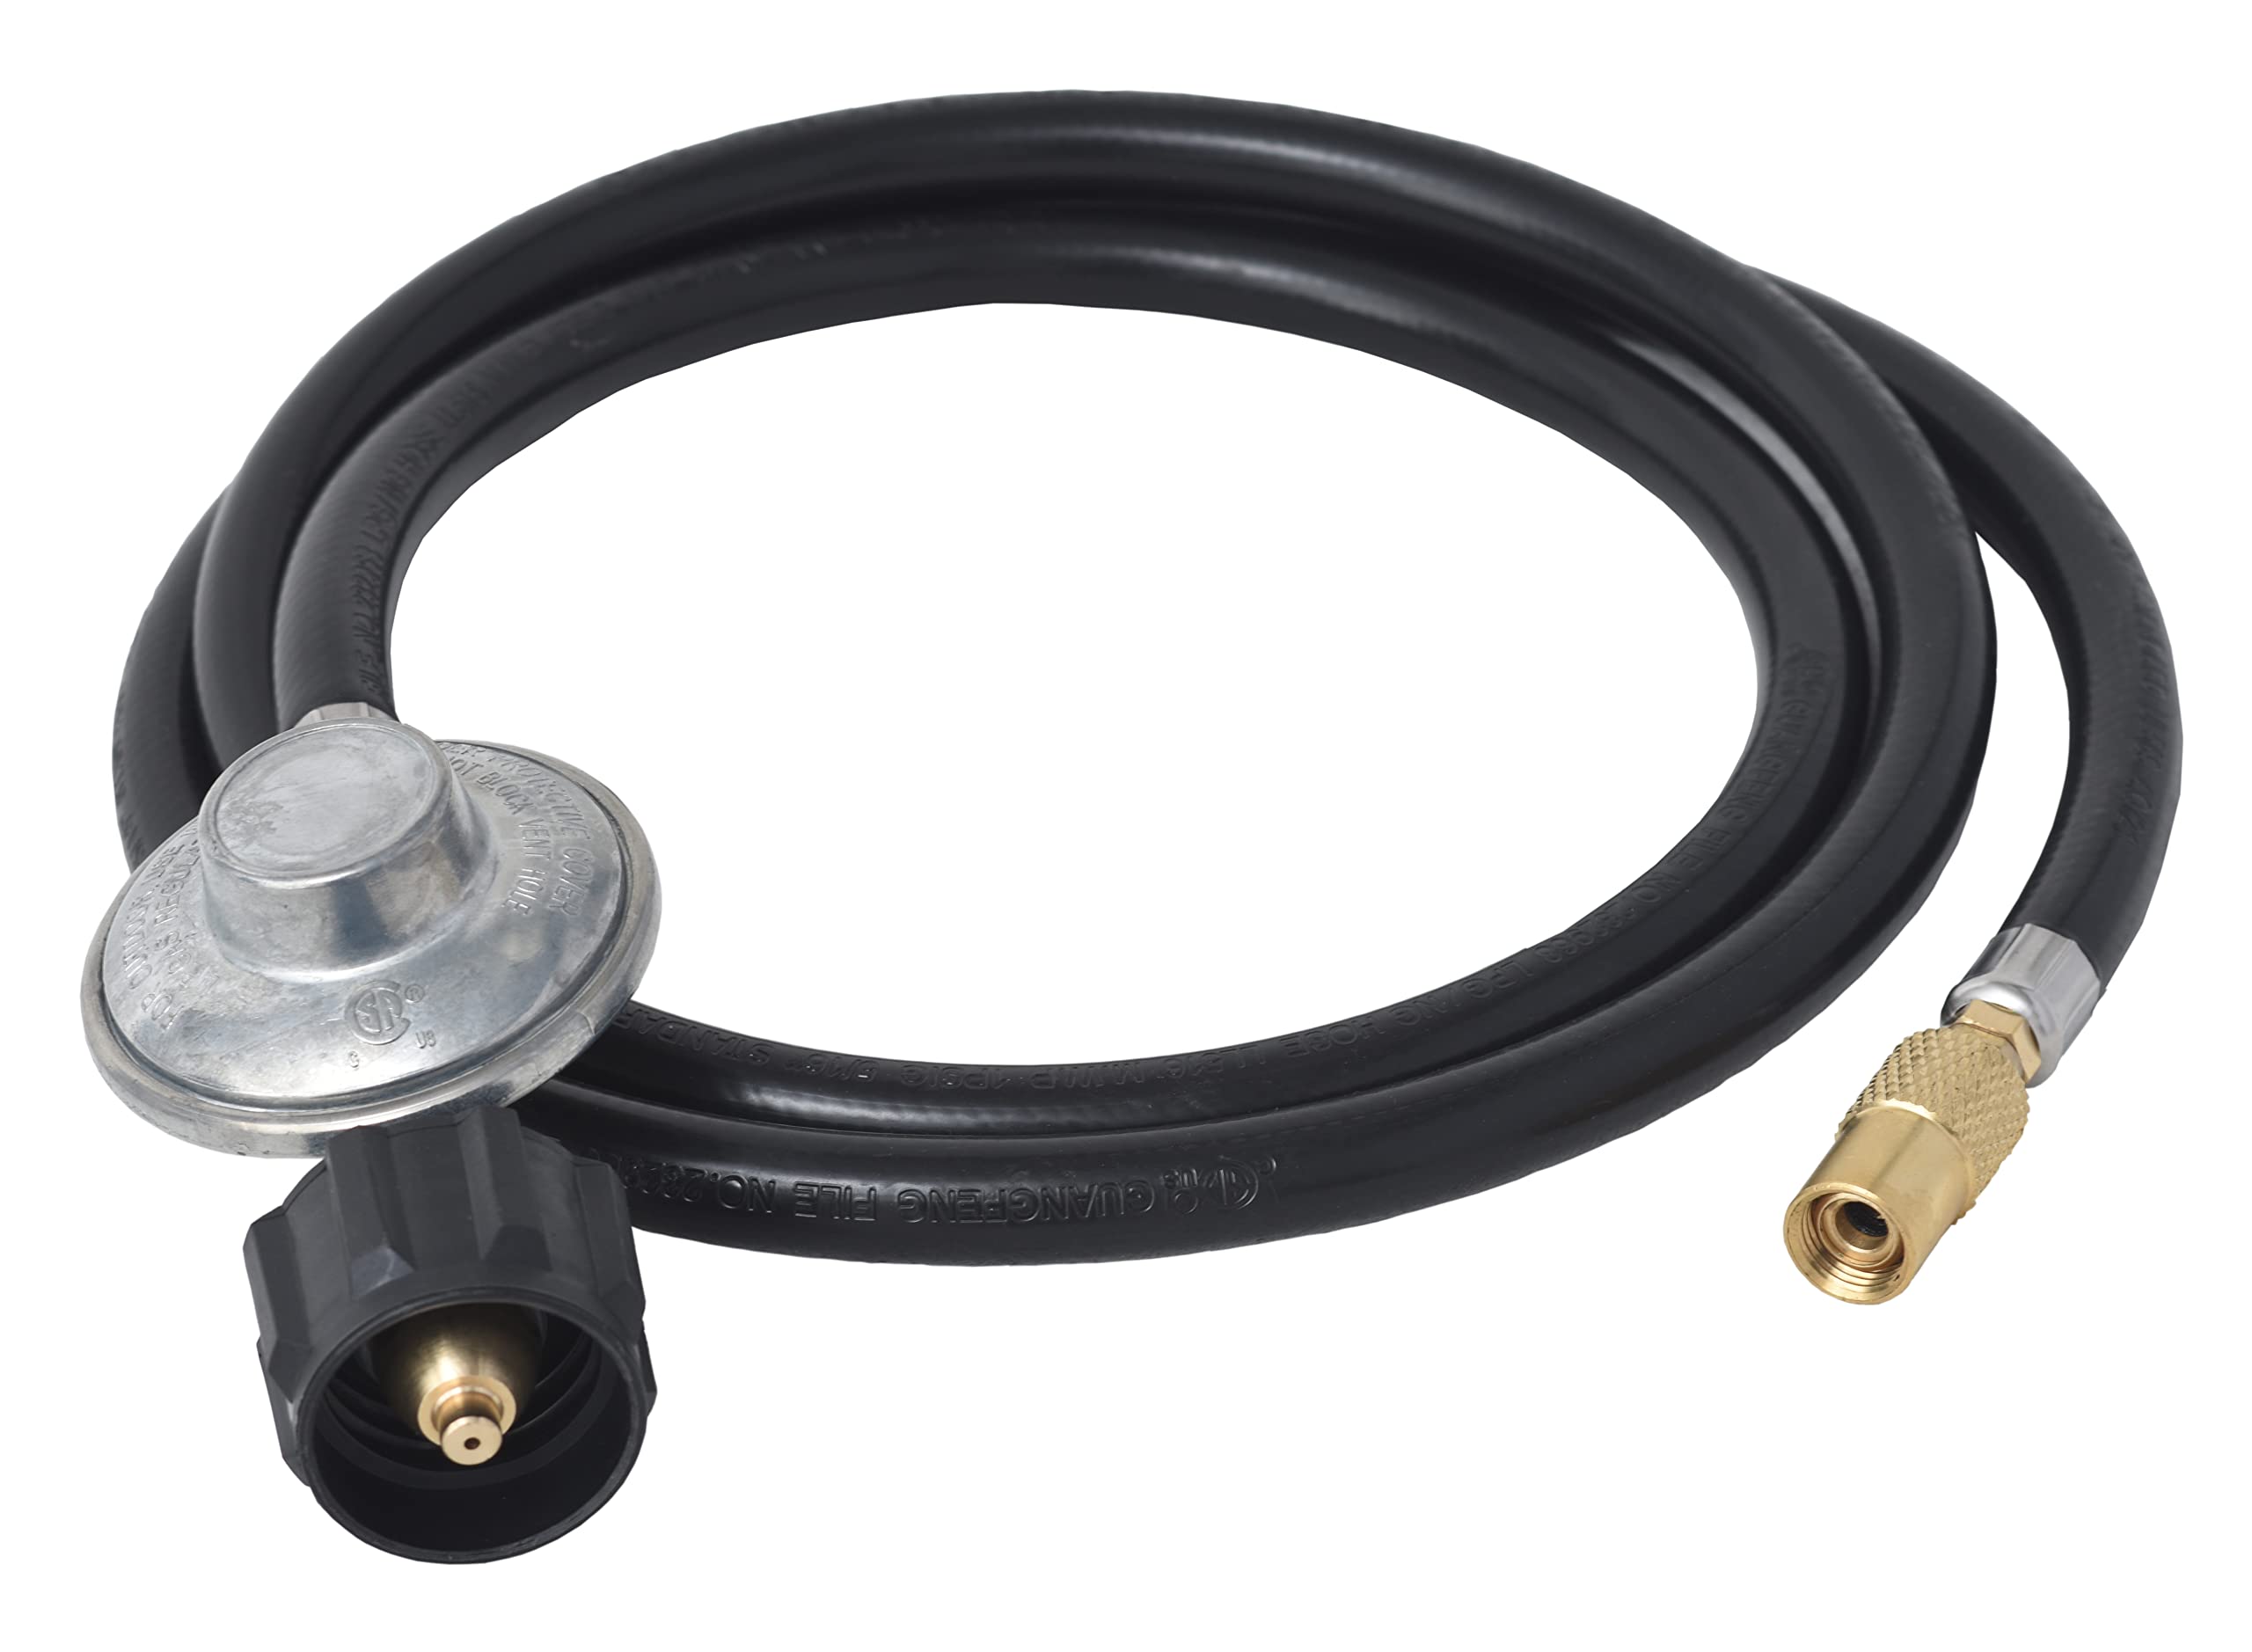 REGULATOR HOSE ADAPTER CONNECT TO 20LB TANK FOR 17IN/22IN BLACKSTONE TABLETOP GRILL GRIDDLE